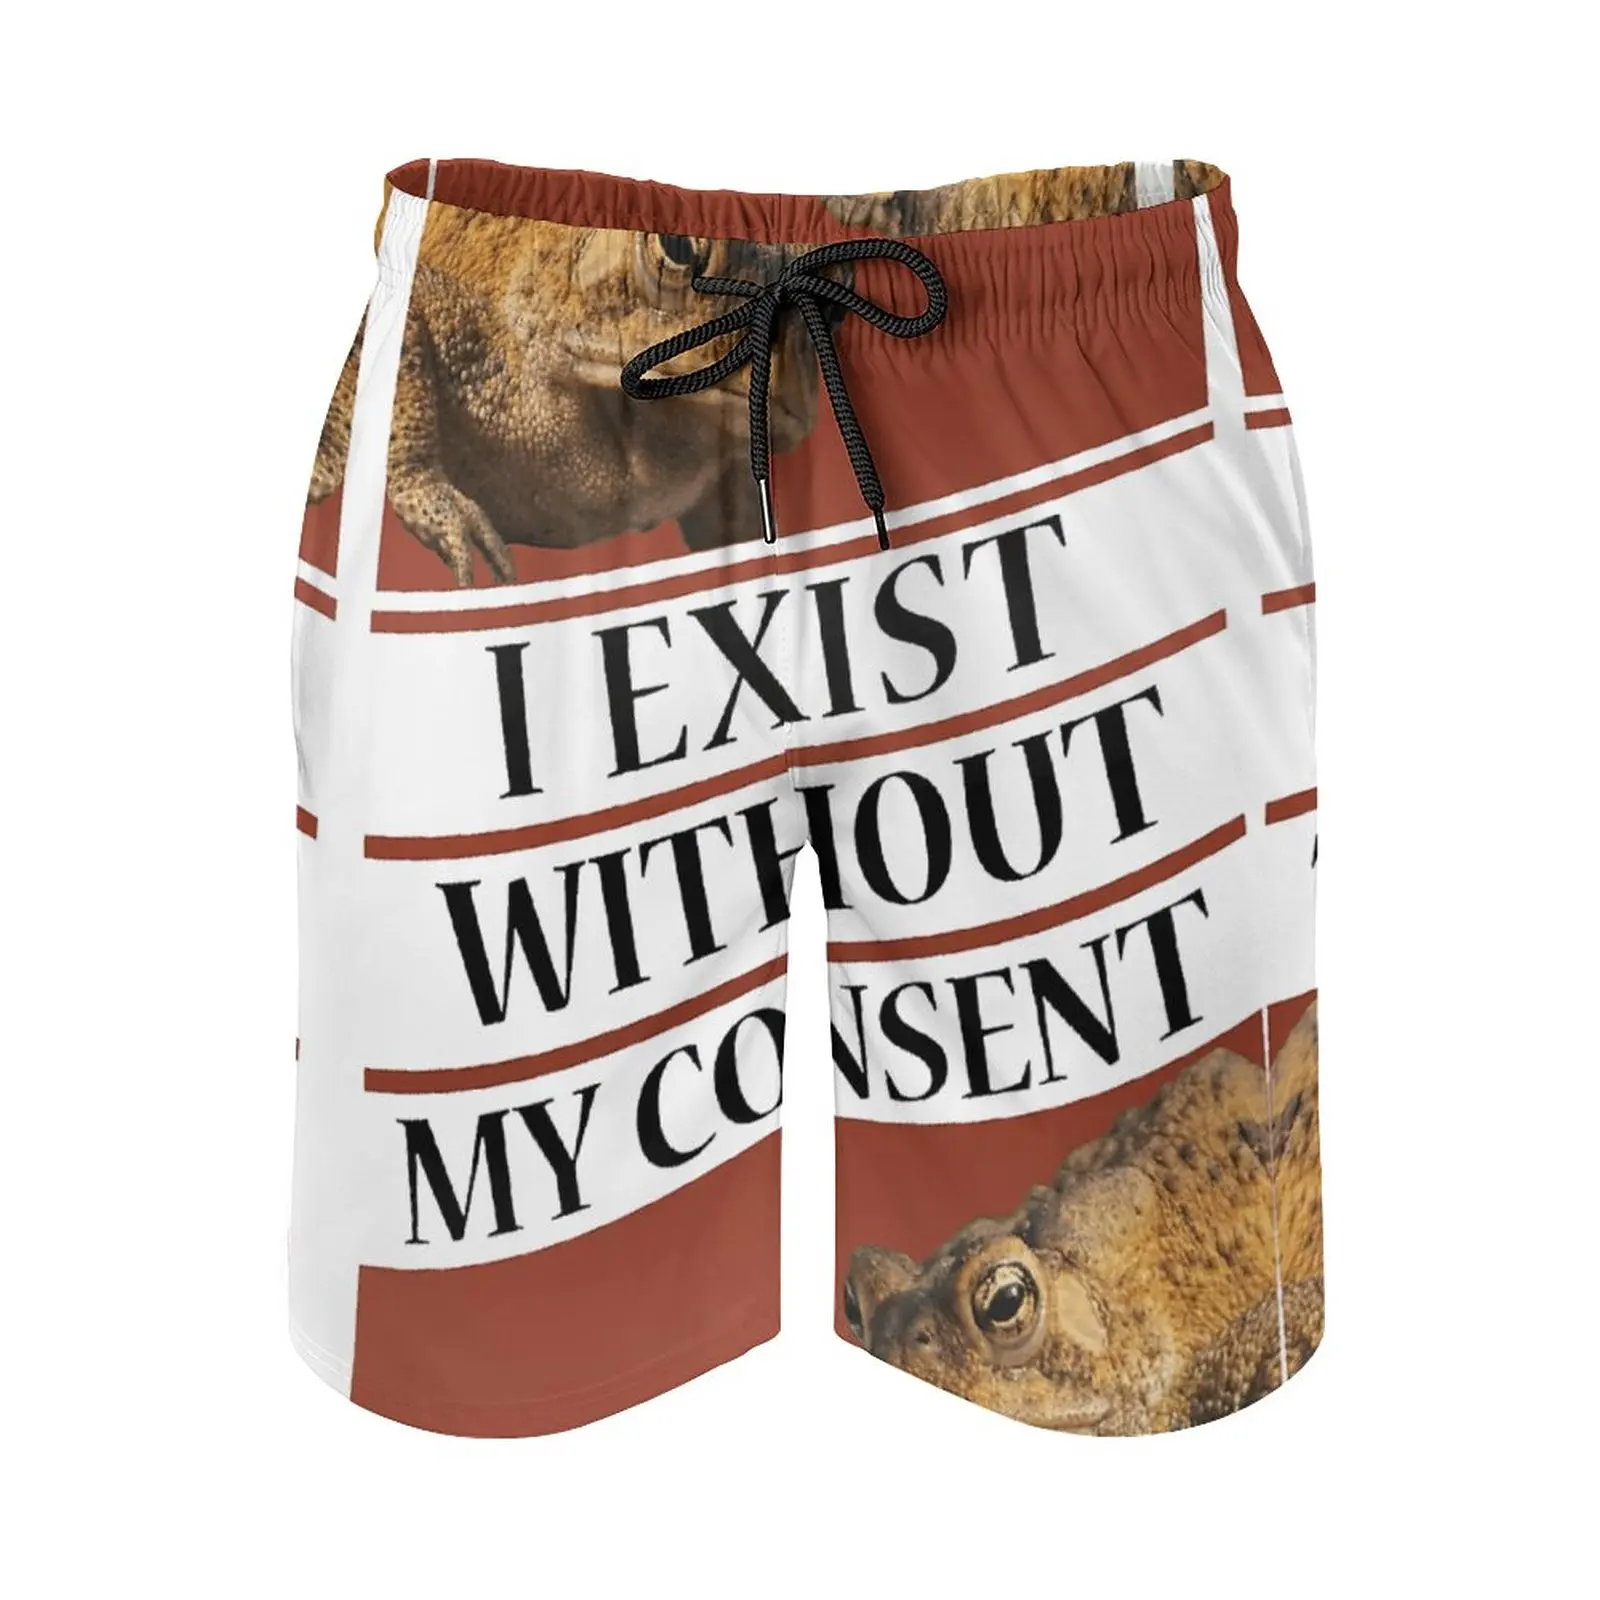 

I Exist Without My Consent Frog 1 Anime BeachFunny Graphic Adjustable Drawcord Breathable Quick Dry Beach PantsCasual Loose Elas